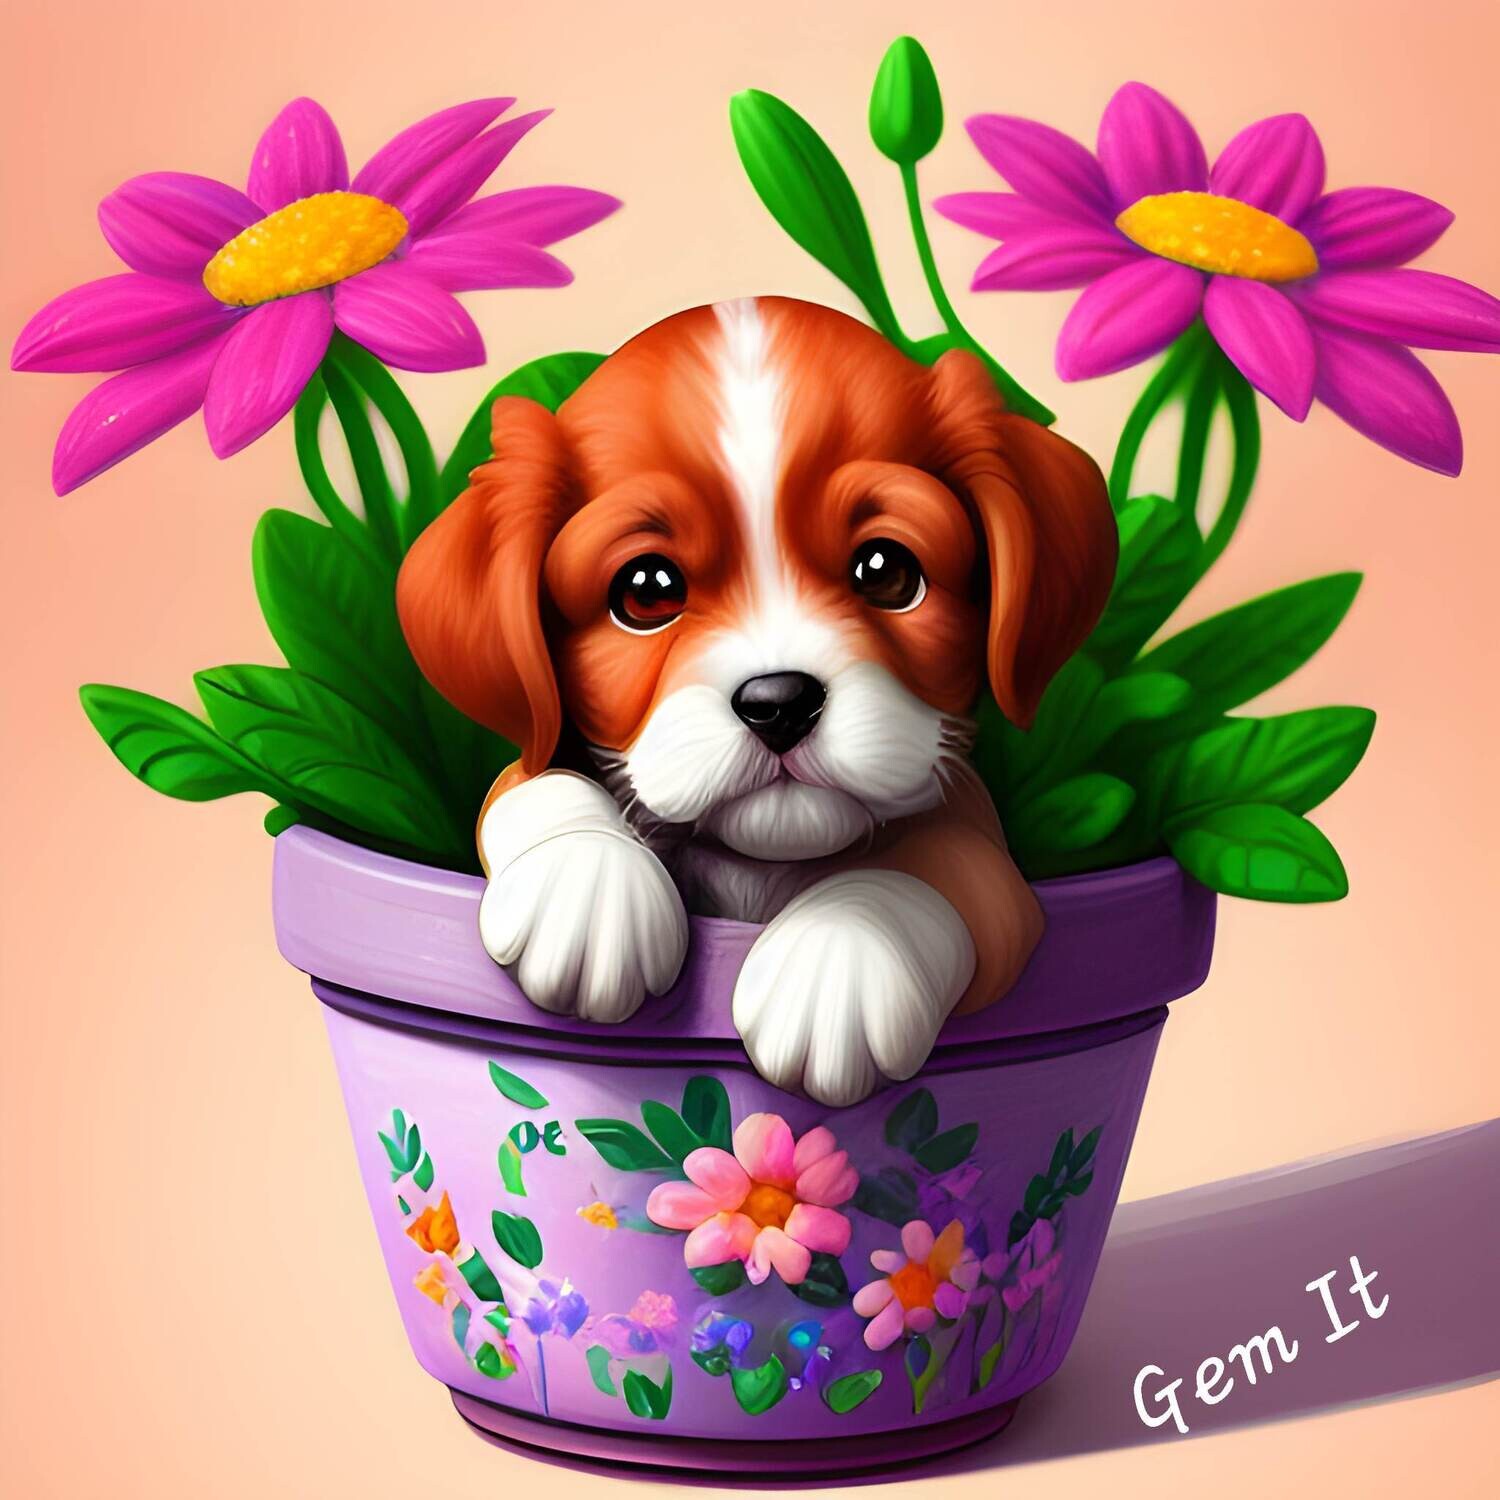 Potted Puppy 695 - Full Drill Diamond Painting - Specially ordered for you. Delivery is approximately 4 - 6 weeks.